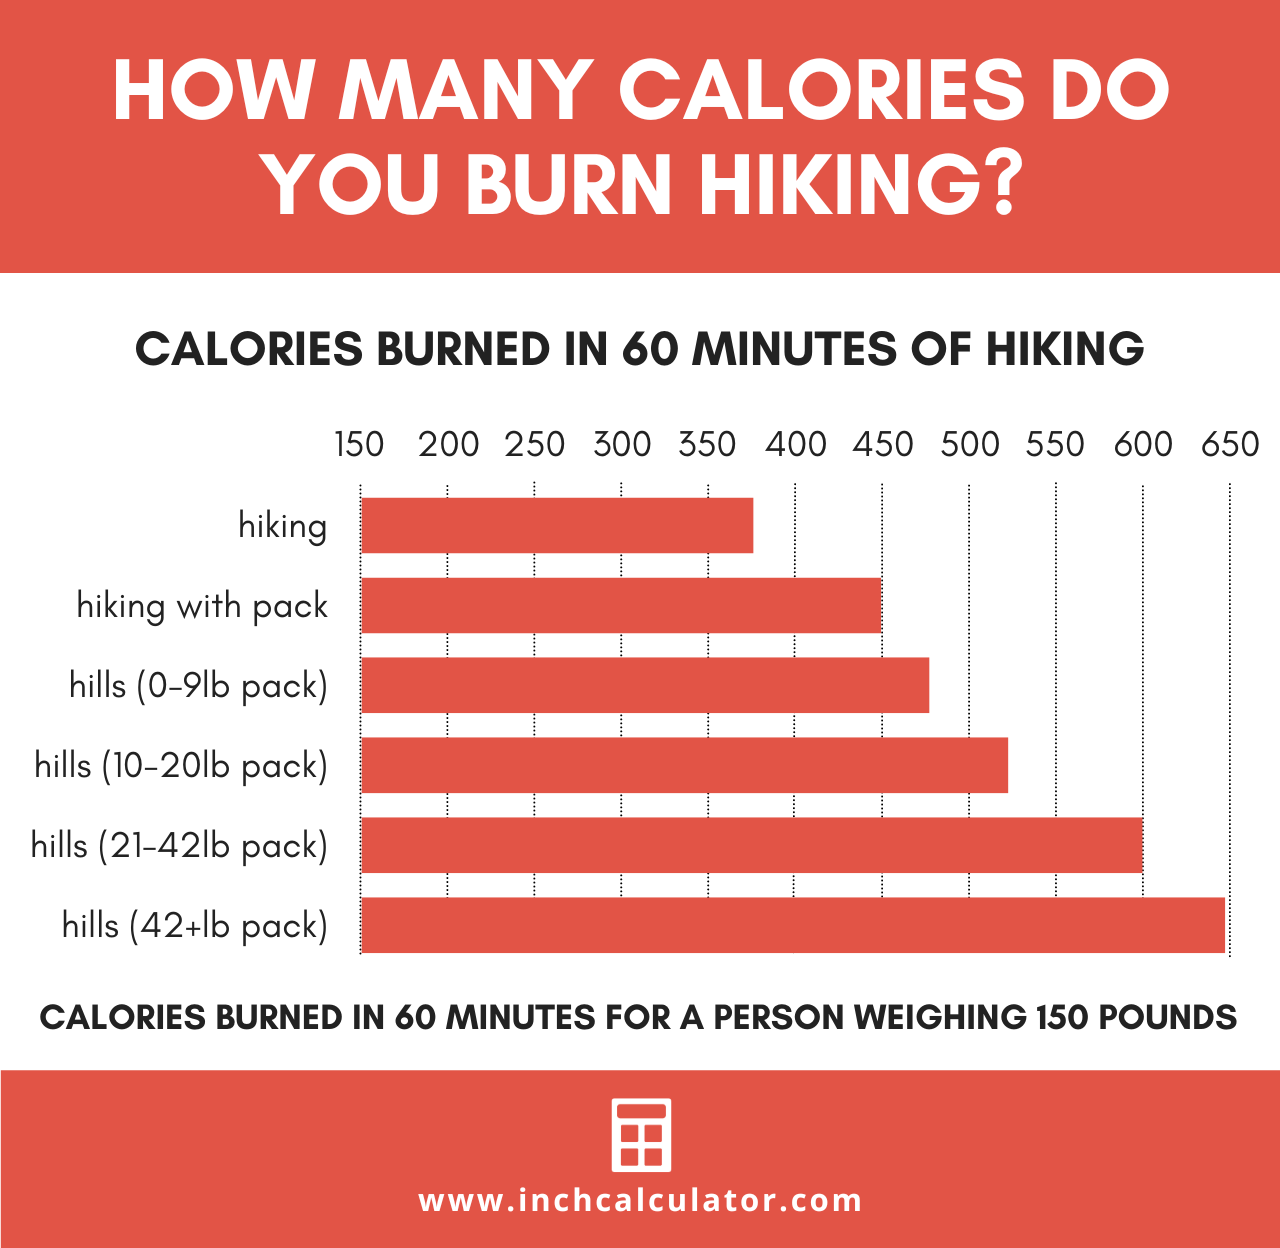 graphic showing the calories burned hiking at various intensities